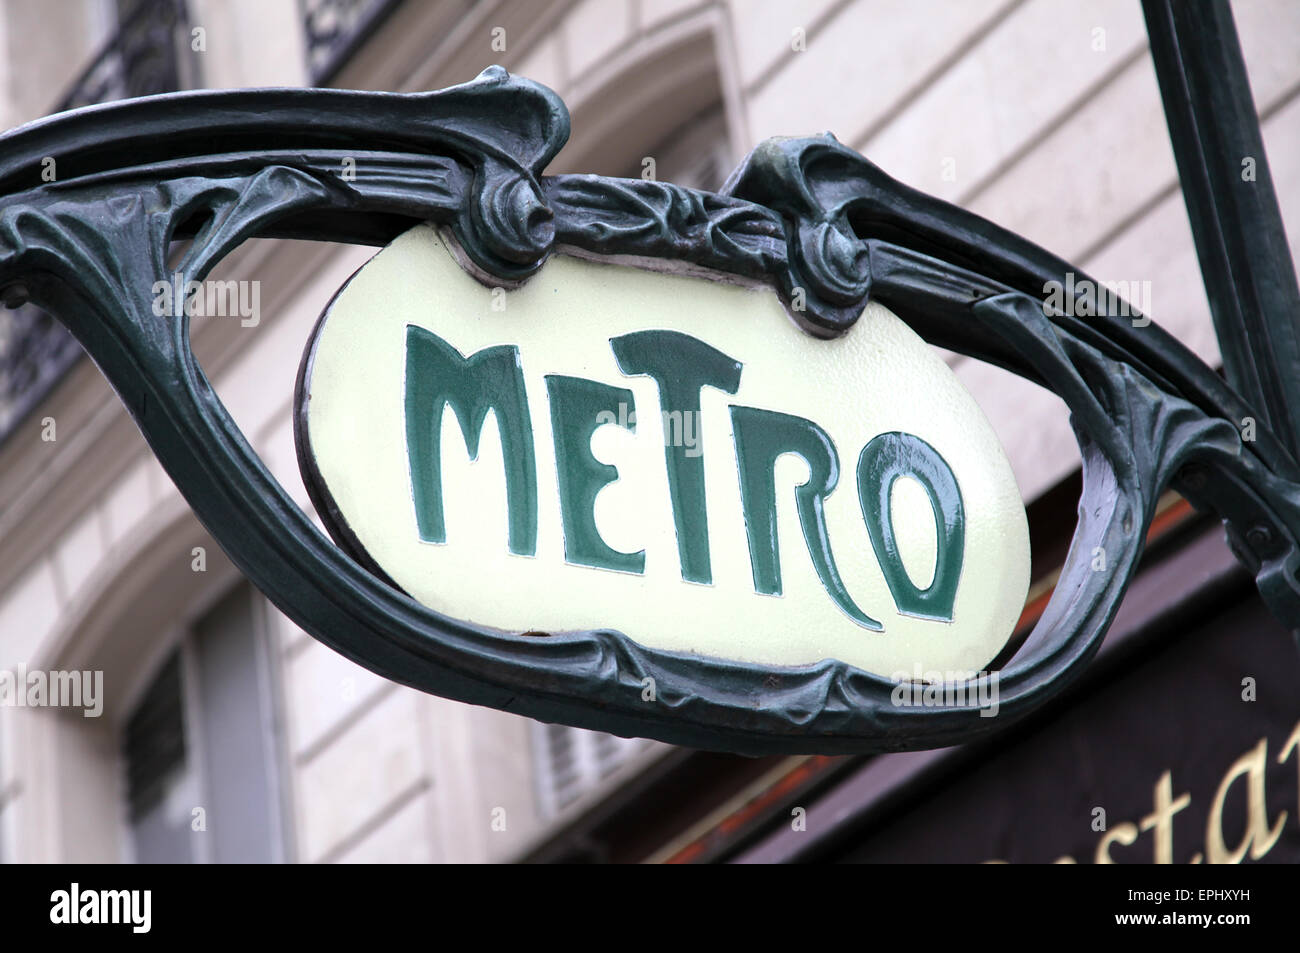 Metro sign by french architect Hector Guimard.Art Nouveau design.Entrance to a metro station in Paris France Stock Photo